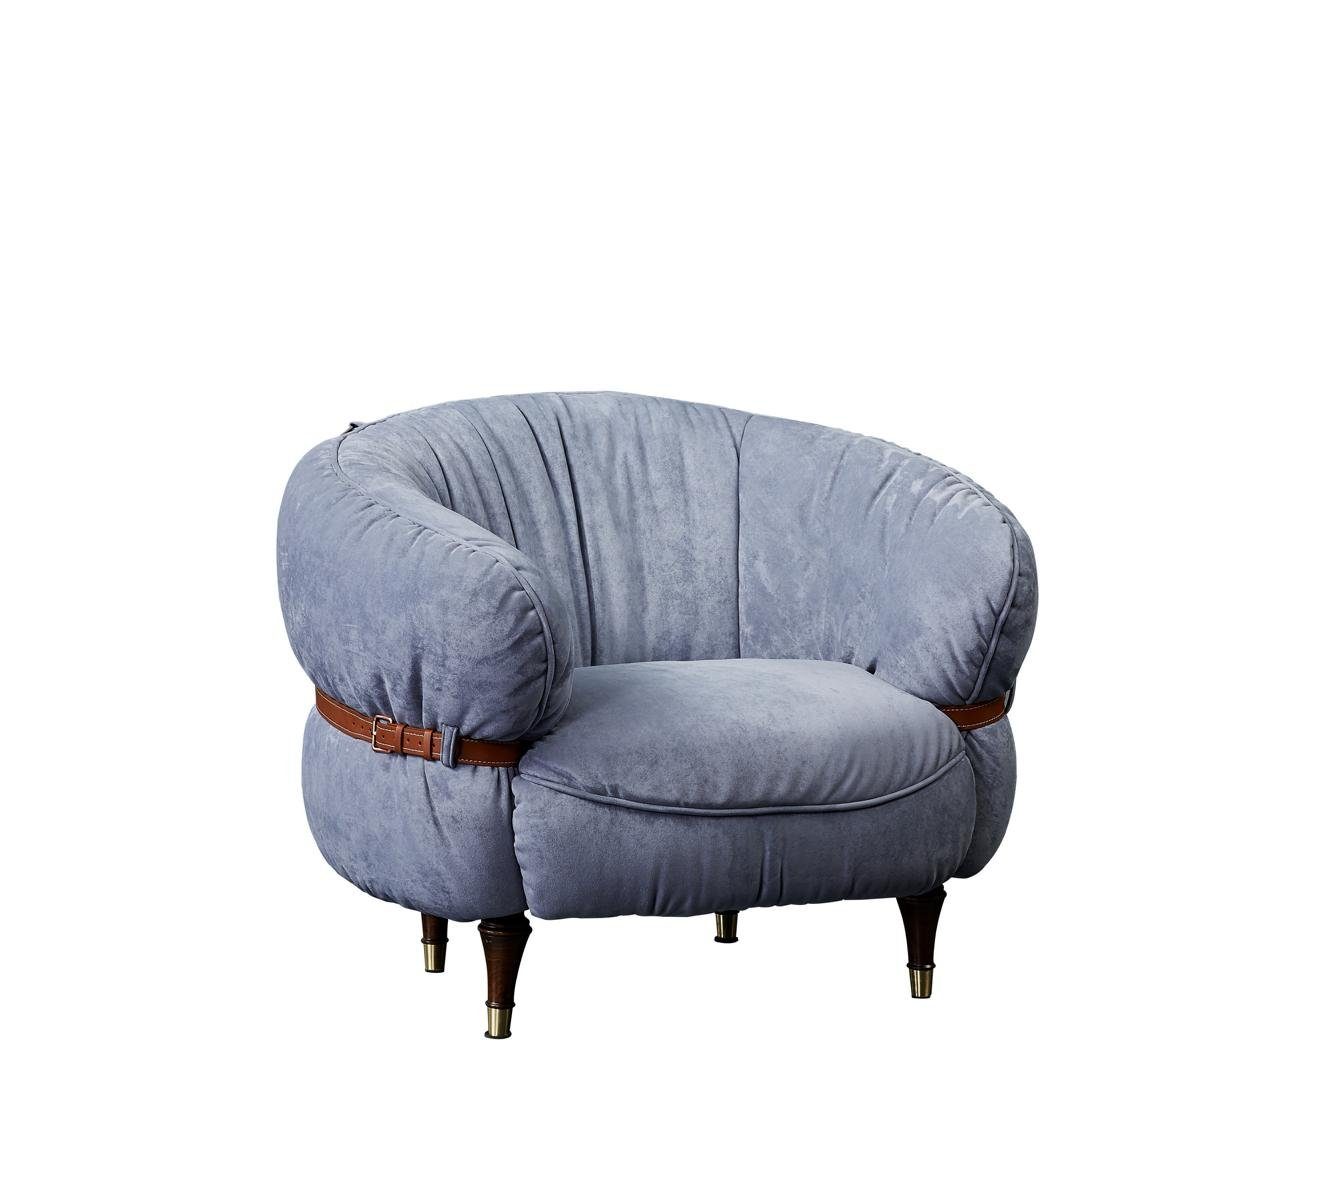 JVmoebel Sessel, Design Sessel Couch Sofa Relax Stoff Lounge Luxus Fernseh Club Polster Grau